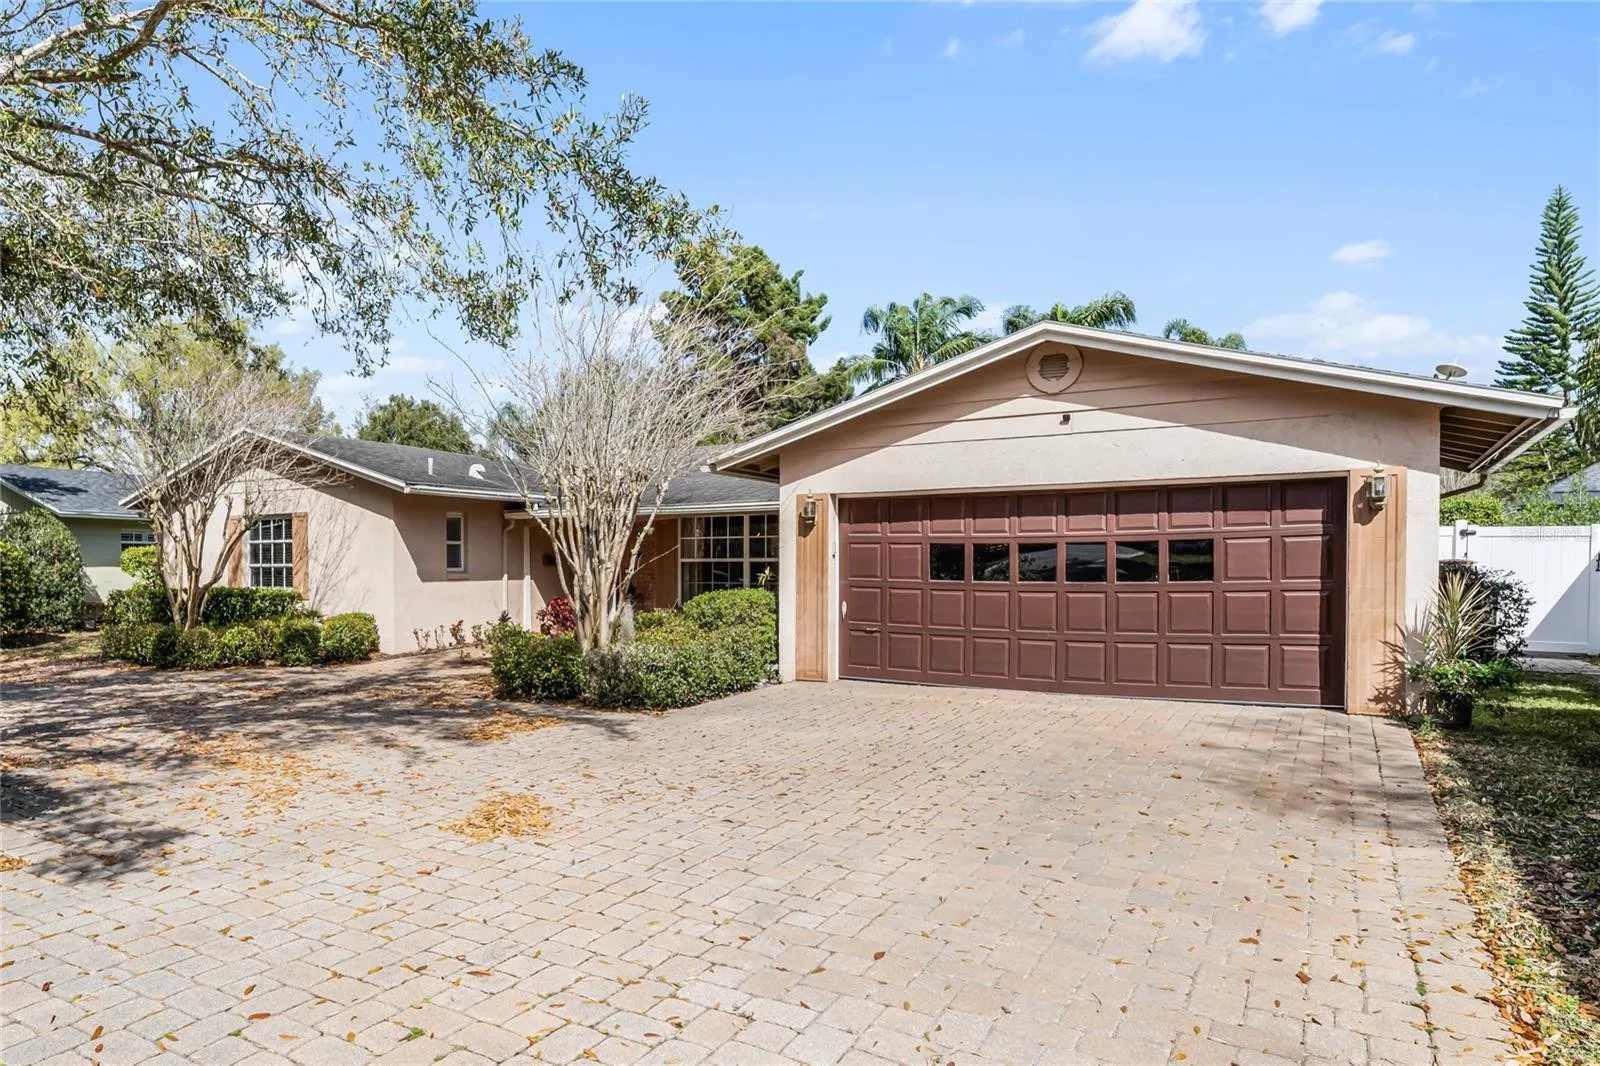 Ken Pozek Group agent Kristen Pavlic assisted a client with listing their home at 1771 Chestnut Avenue in Winter Park, closing at $835,000 on 4/9/2024.